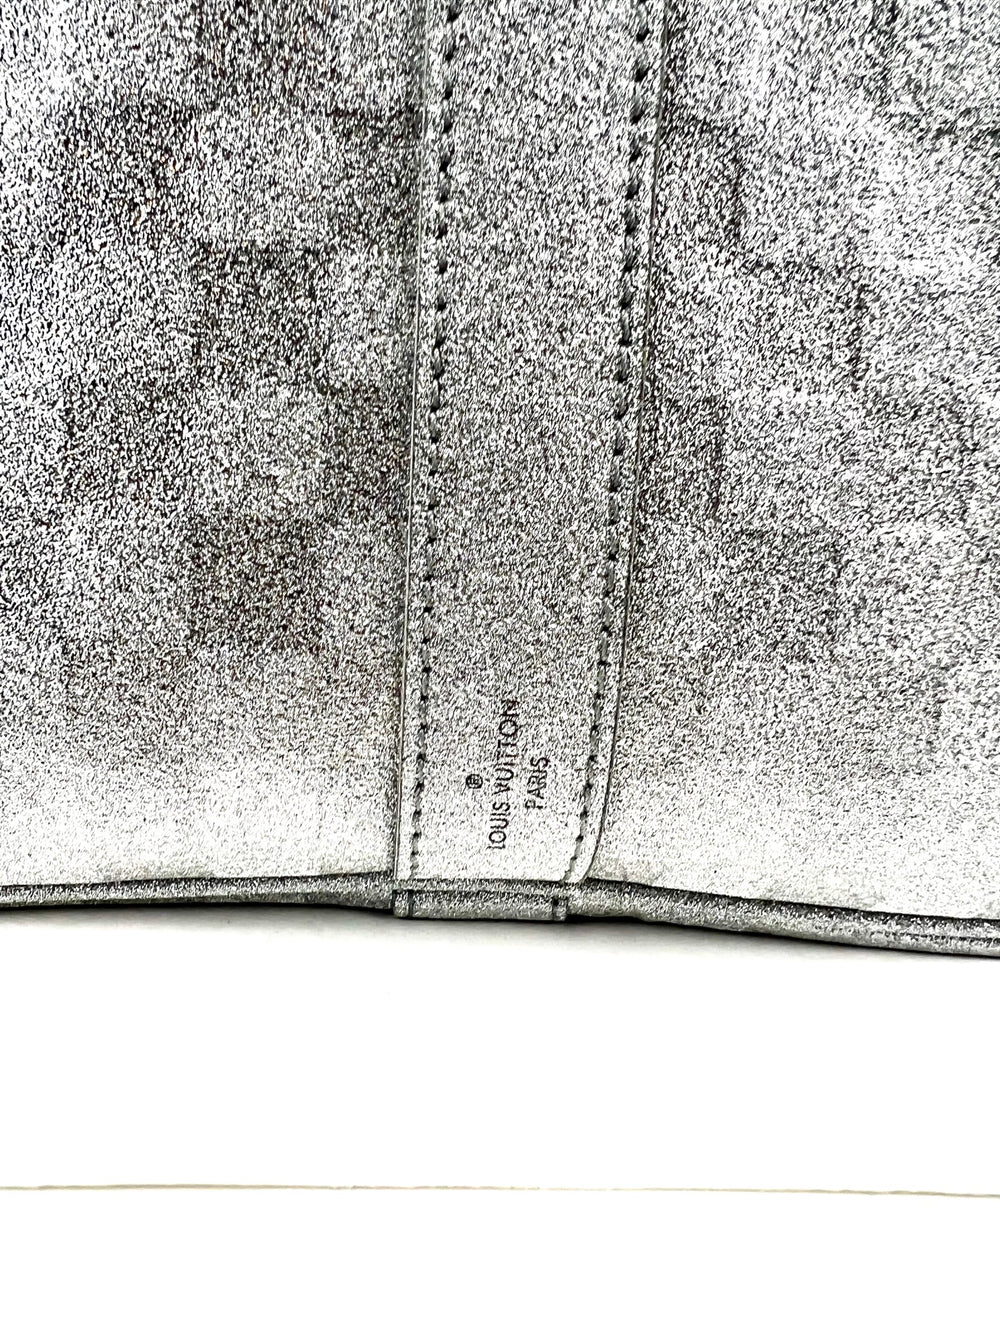 If anyone has been looking for a Glitter Keepall 50B (N58041), I